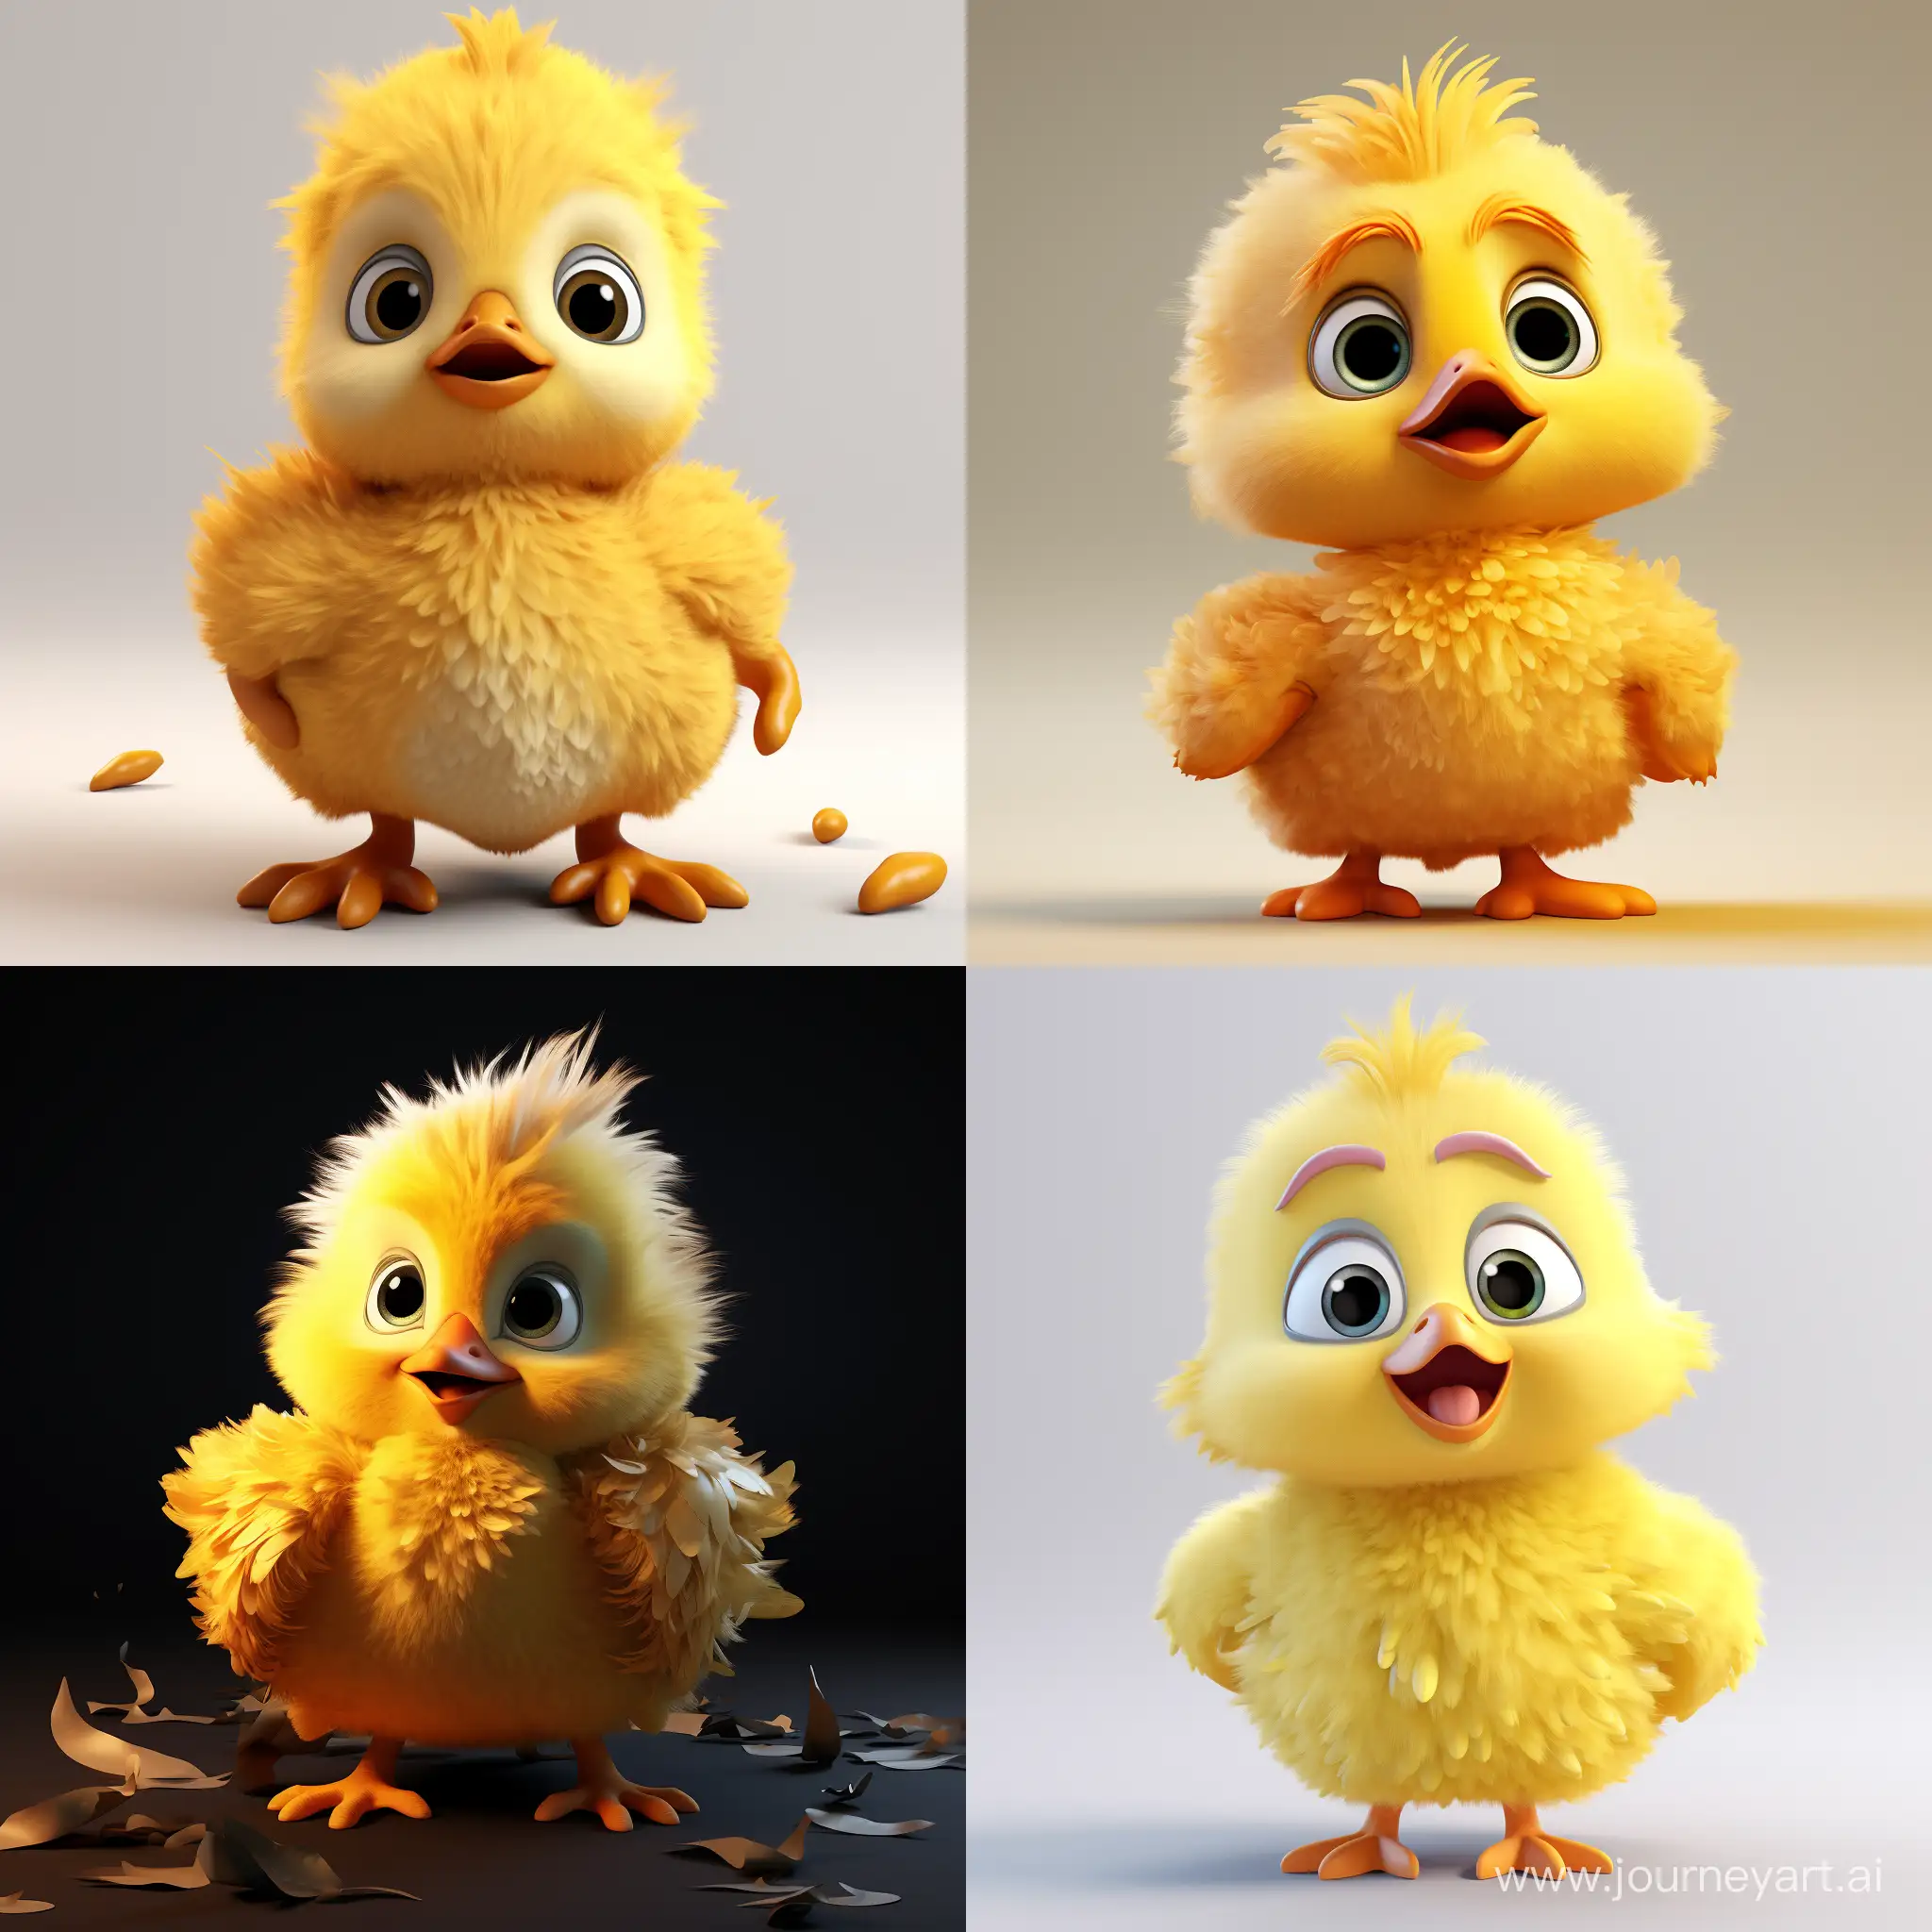 Adorable-3D-Animated-PixarStyle-Yellow-Duckling